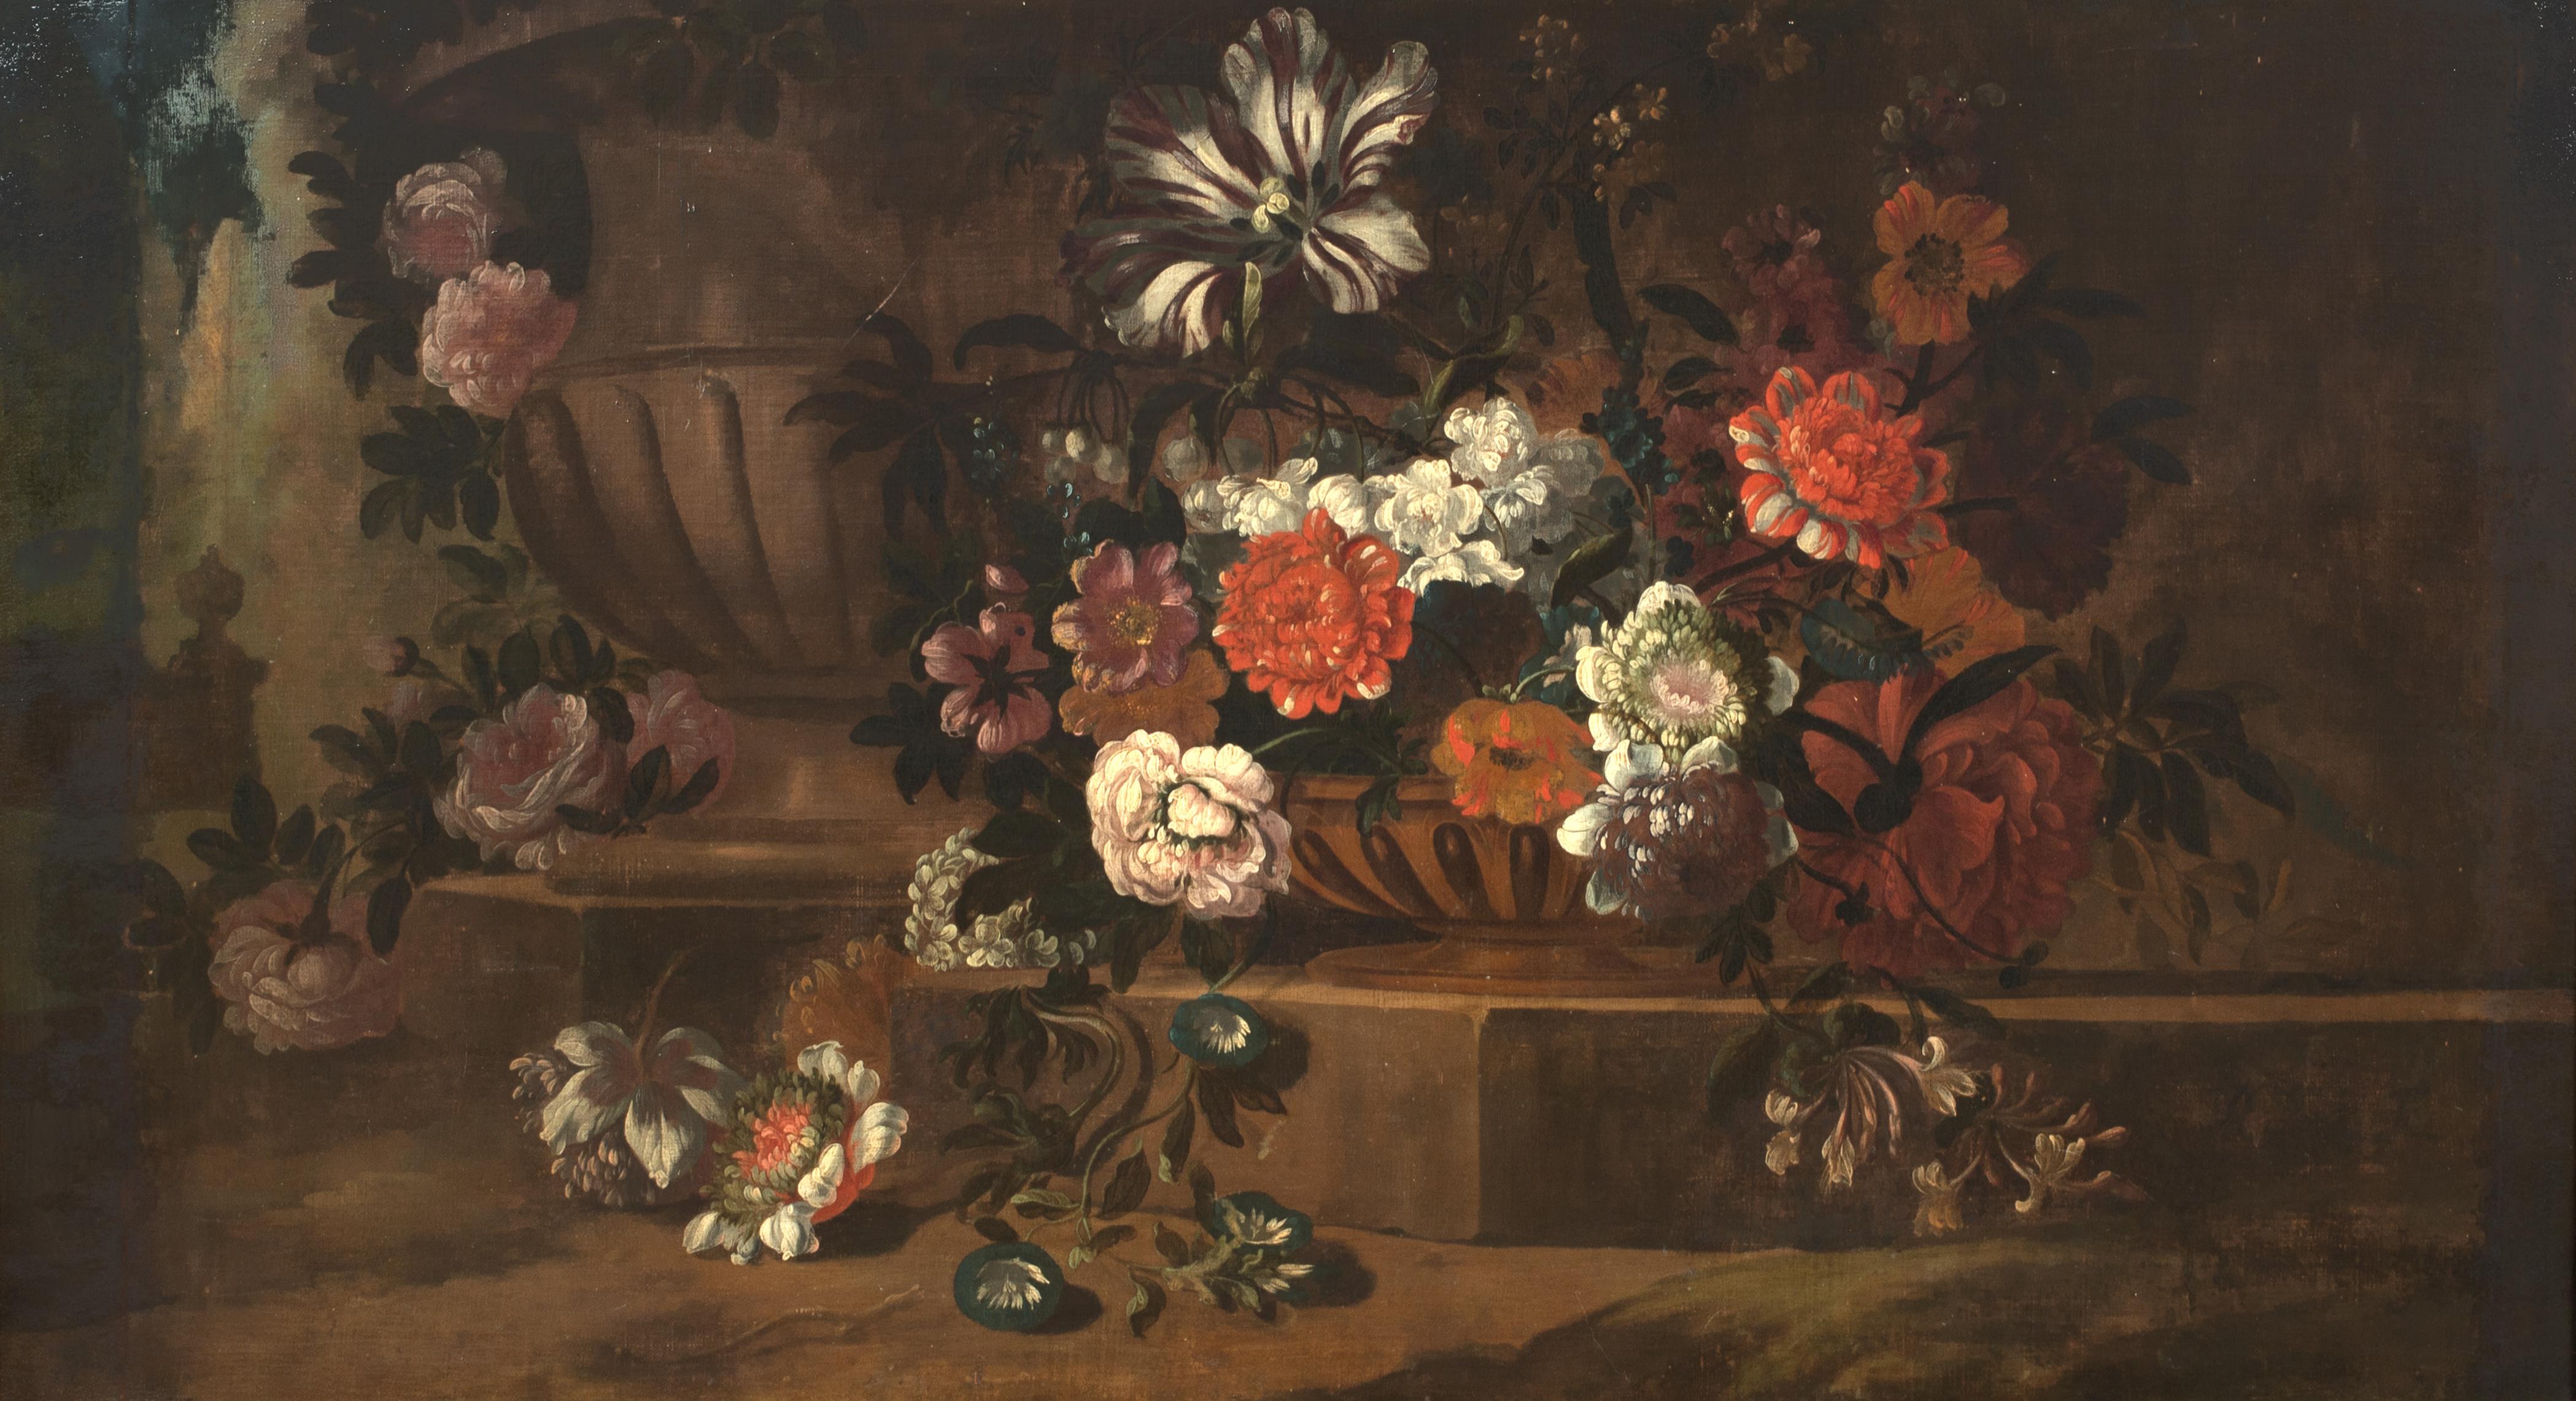 Still life Of Flowers In A Classical Urn, 18th Century  - Painting by Unknown